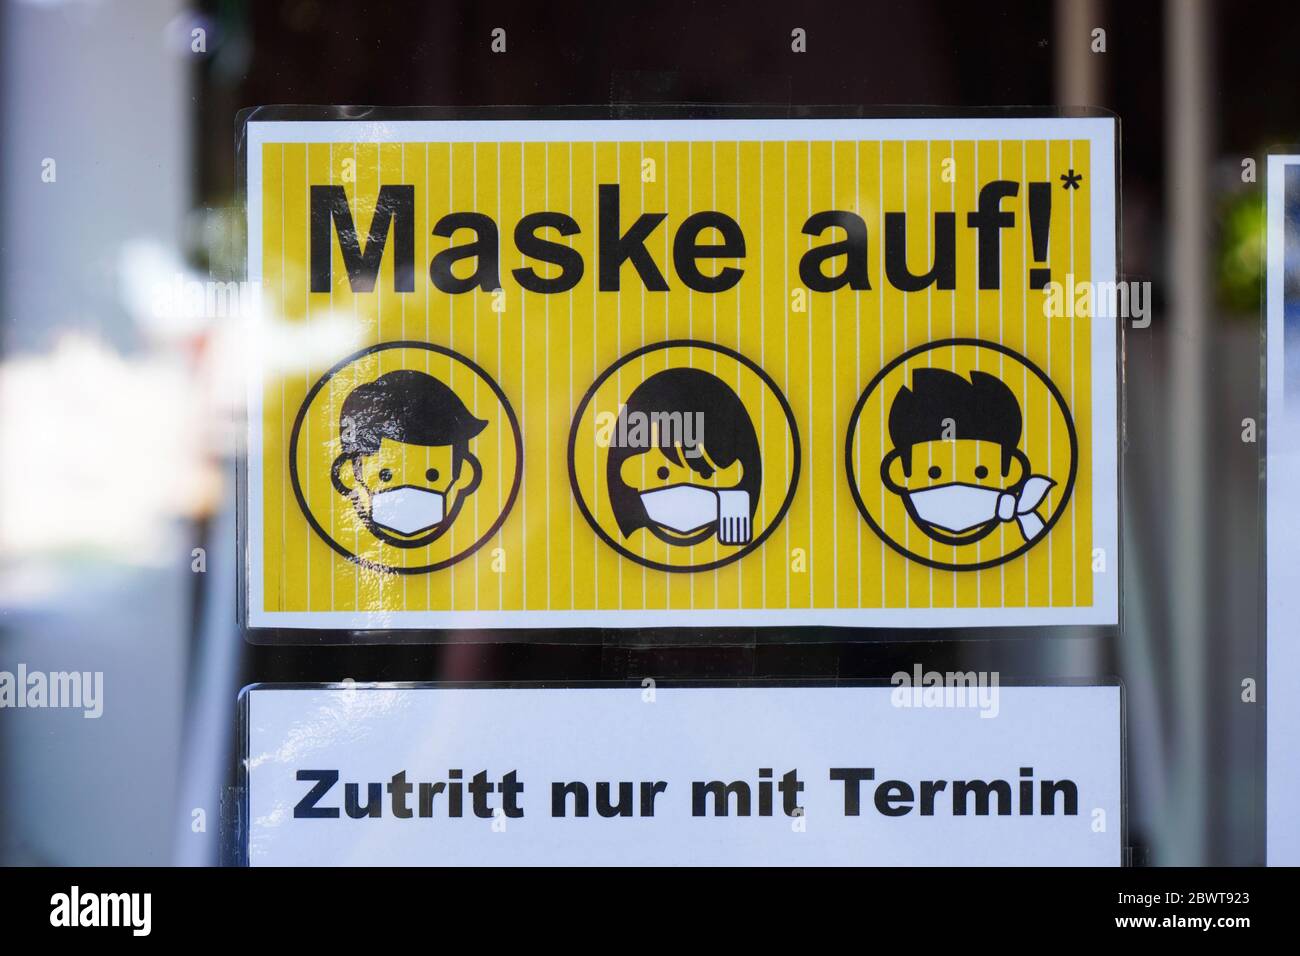 Hannover, Germany - June 1, 2020: German language sign on entrance door to tattoo parlor advises that face mask is mandatory and entry by appointment only. Stock Photo